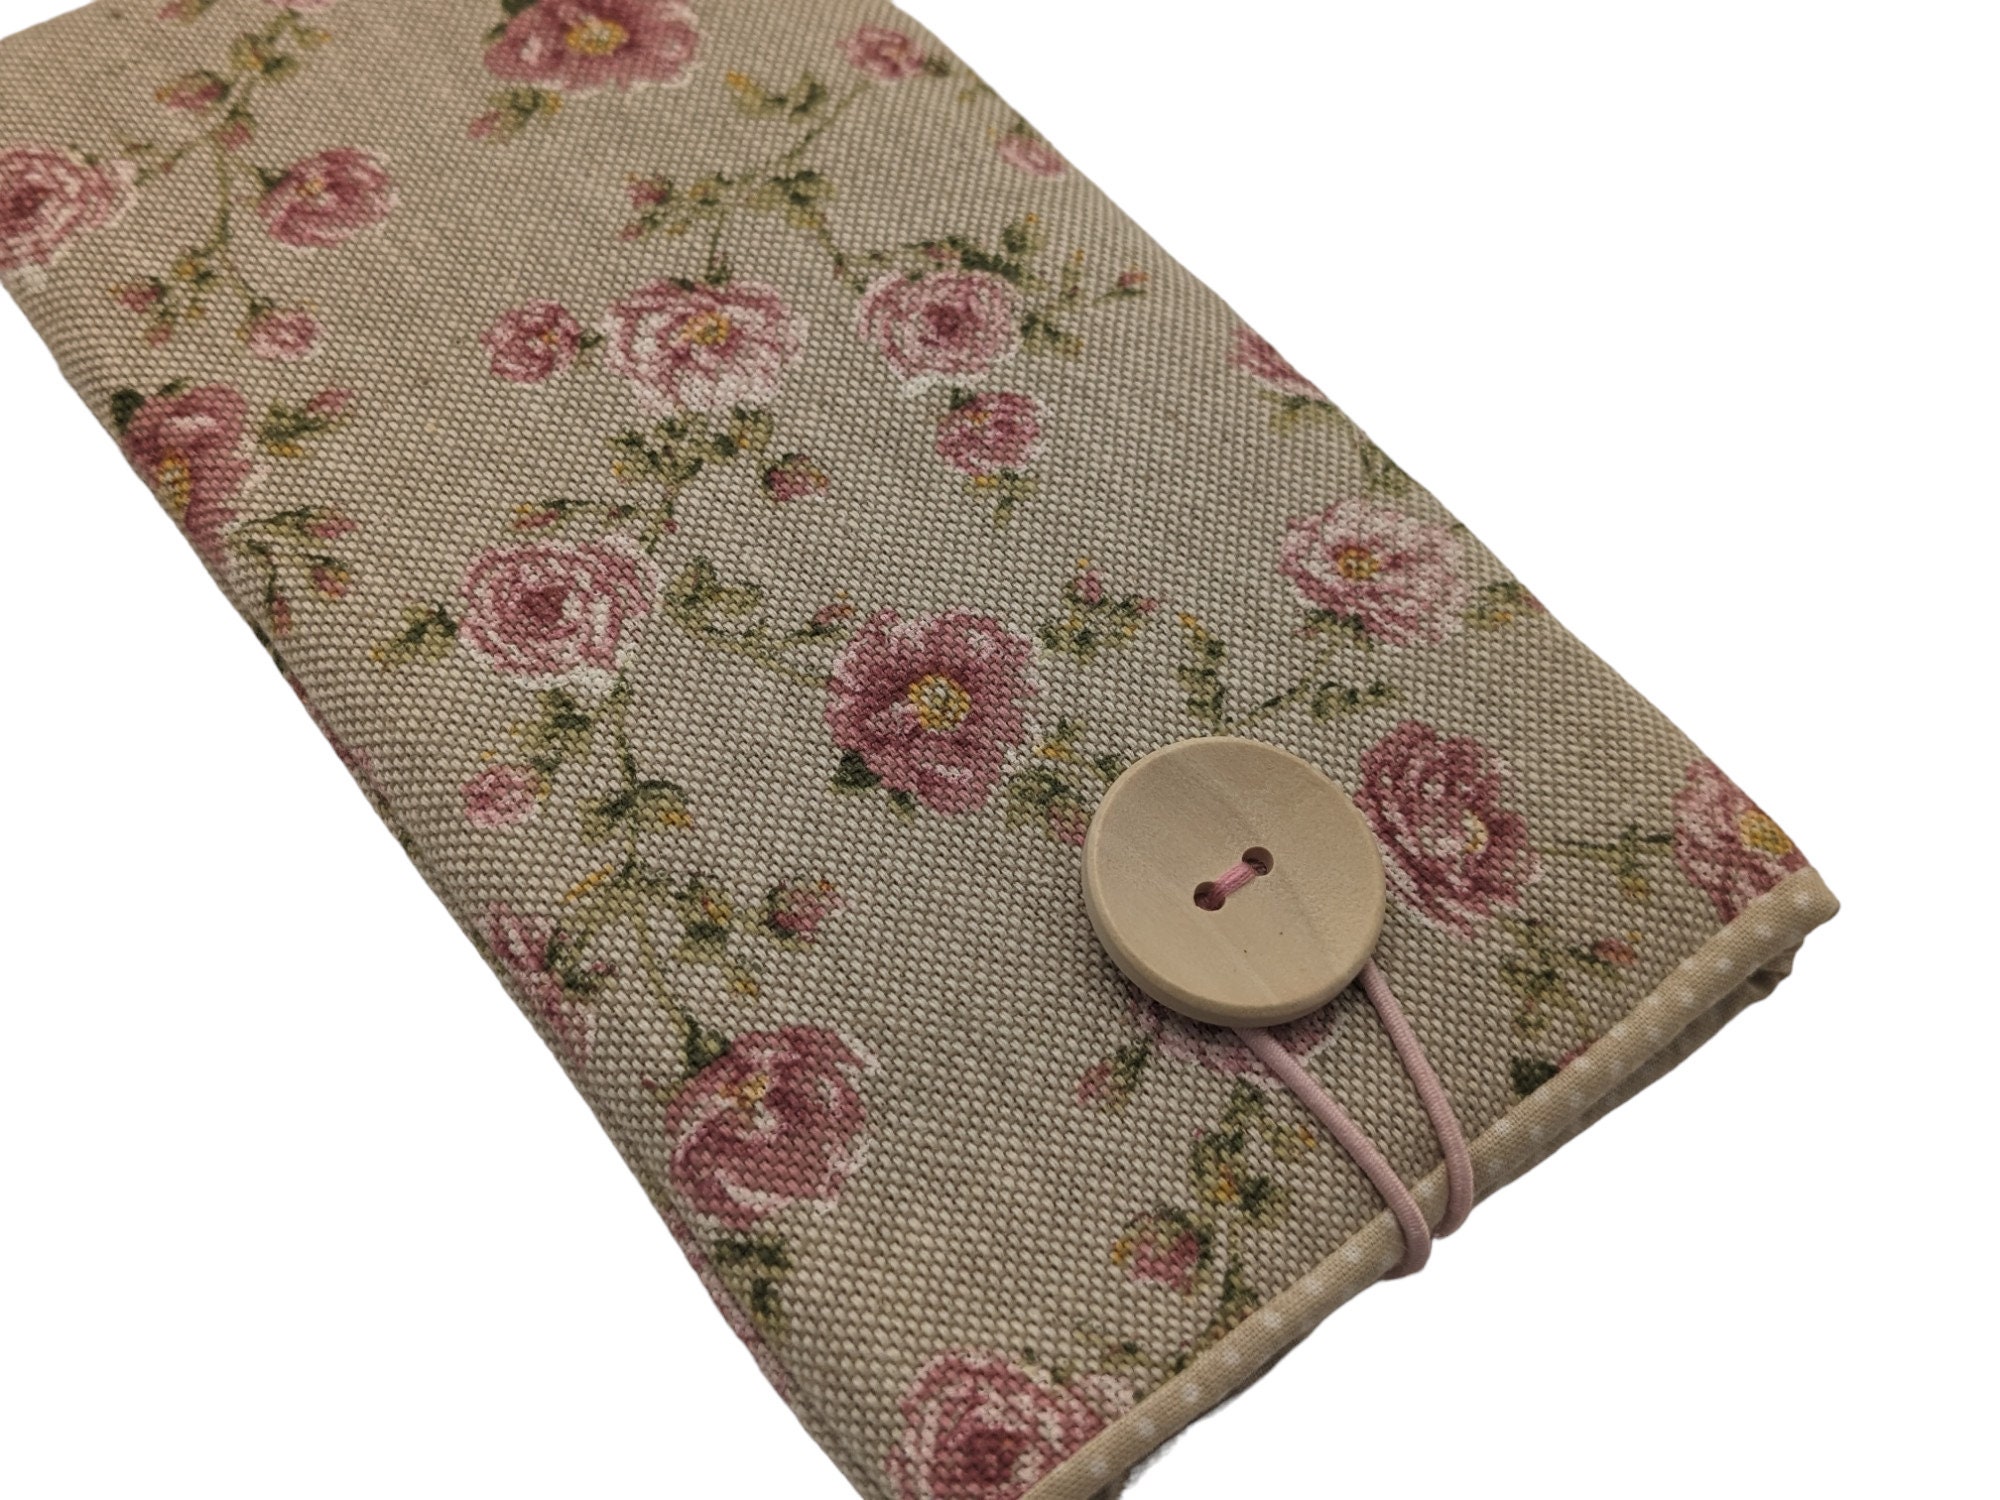 Zippered Pencil Pouch Small Beige Linen Pencil Case Container